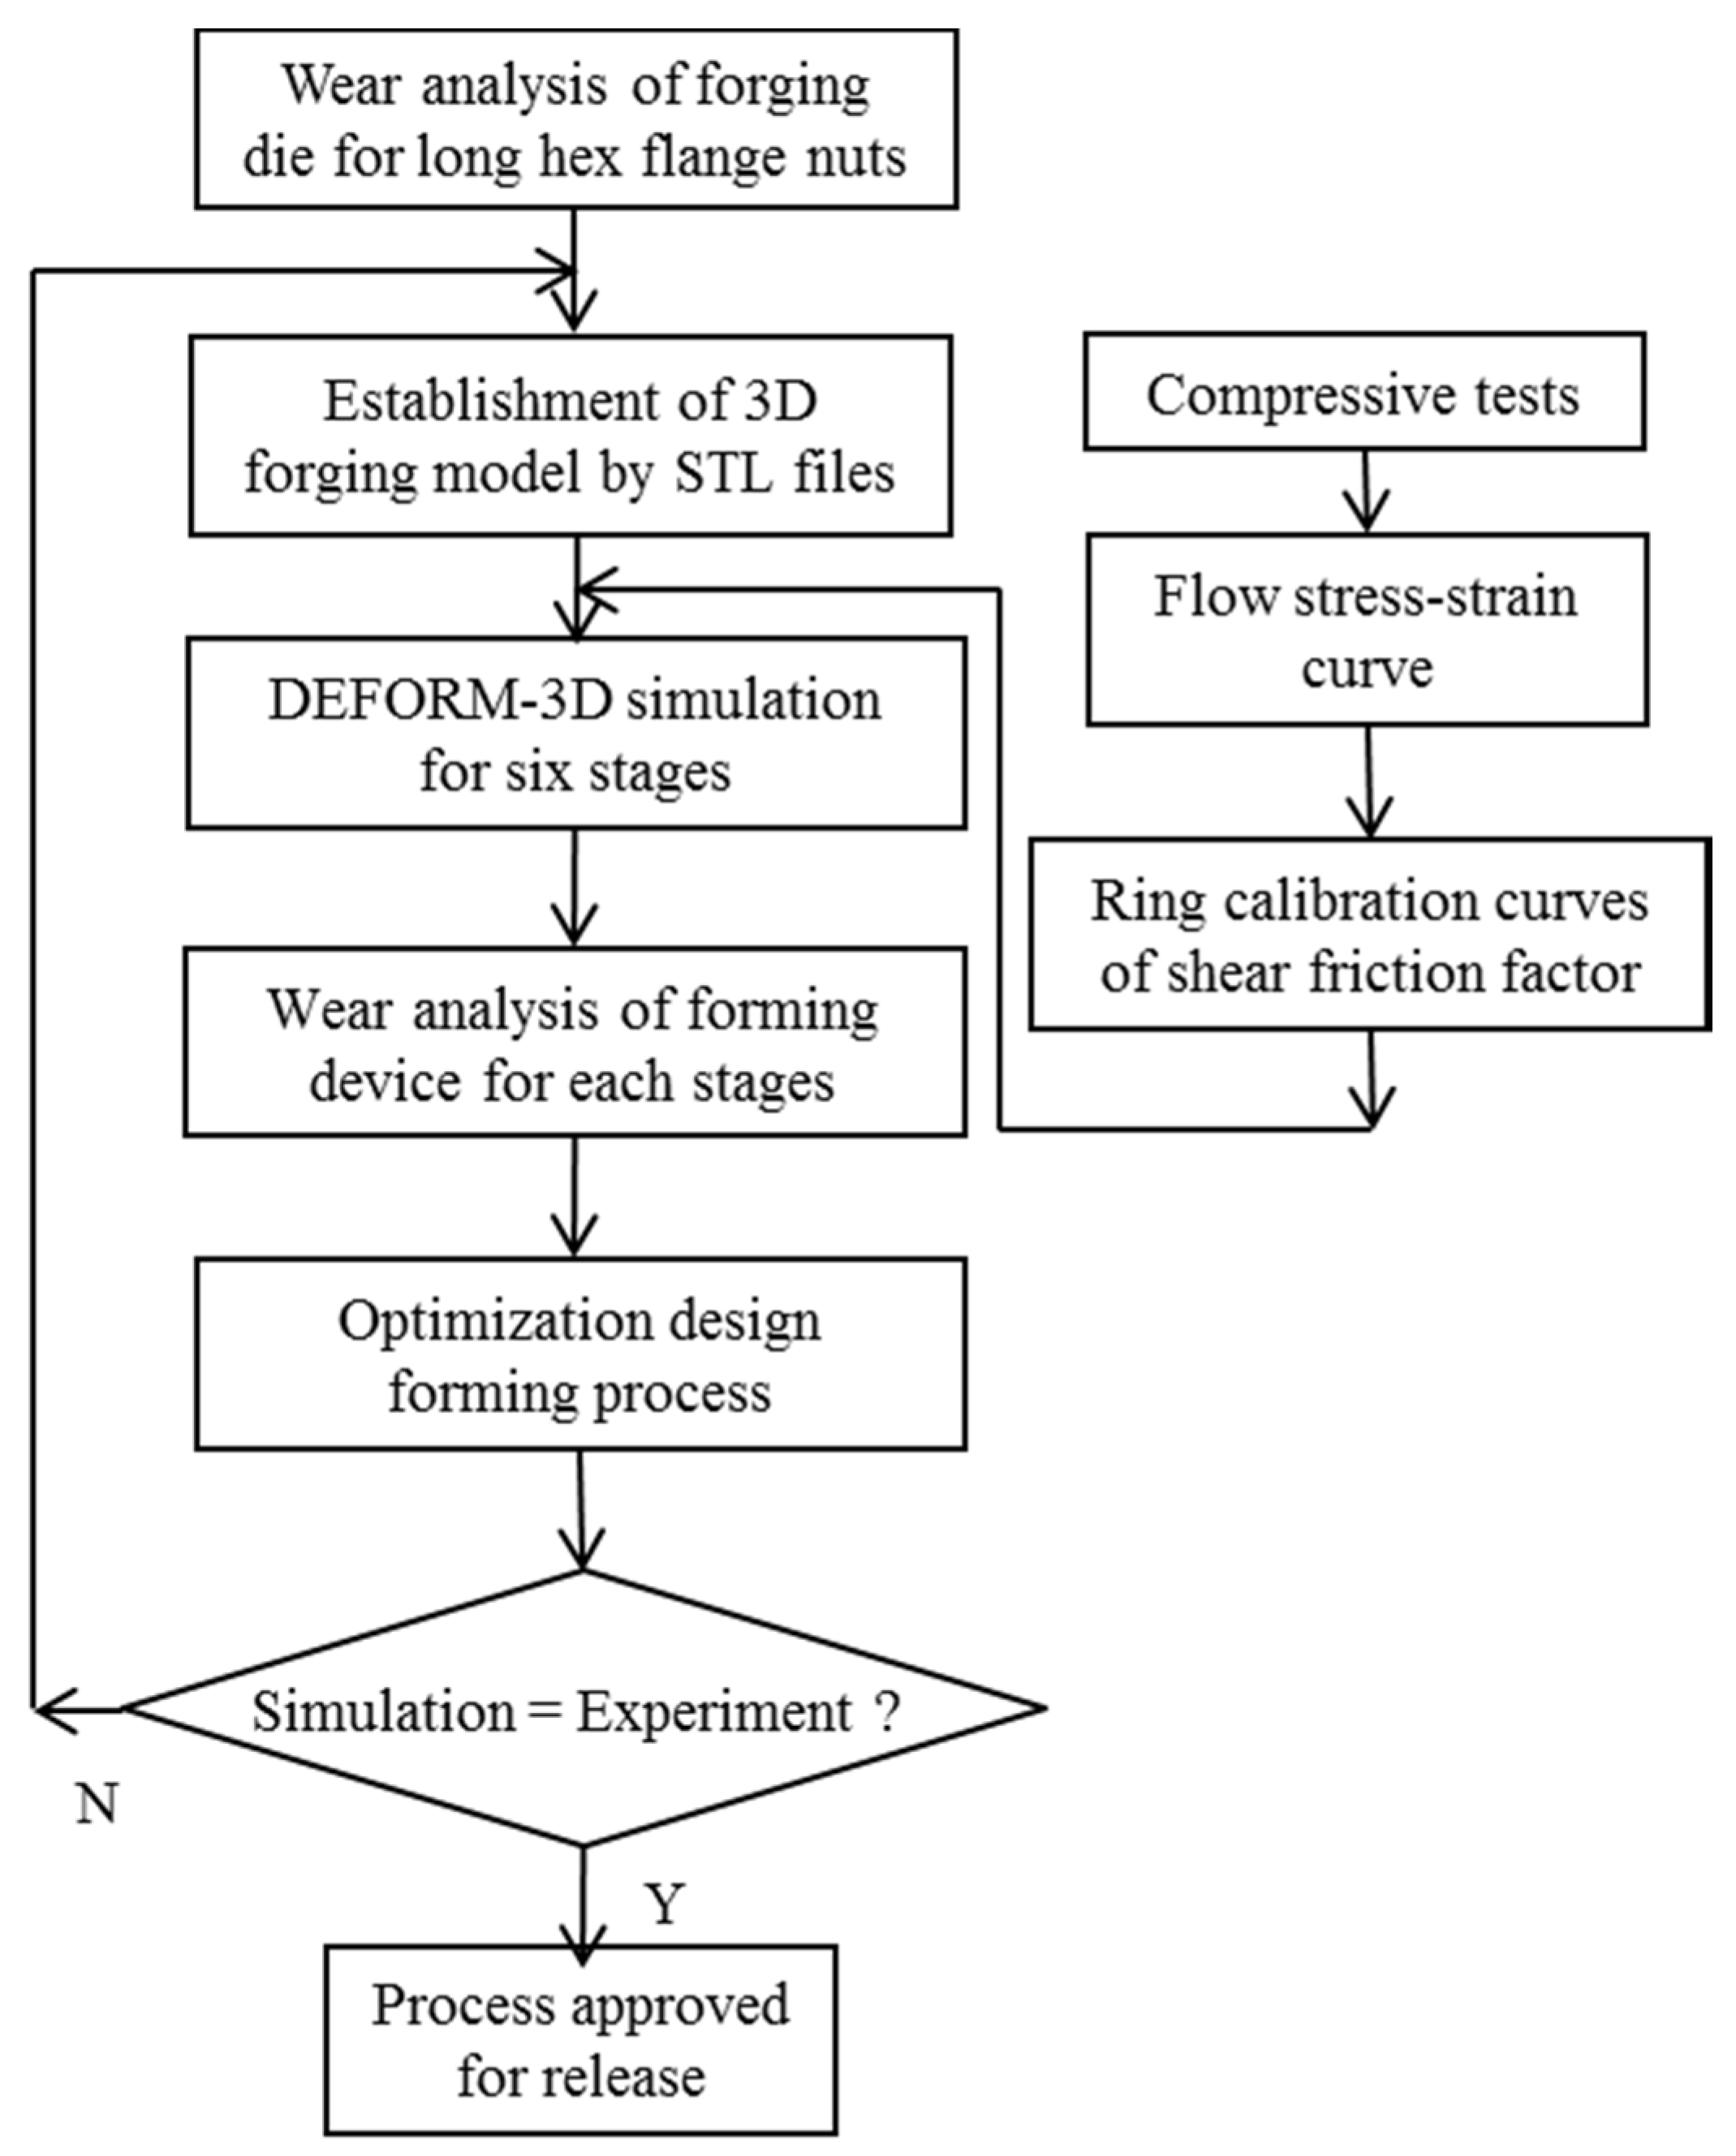 Cold Forging Process Flow Chart